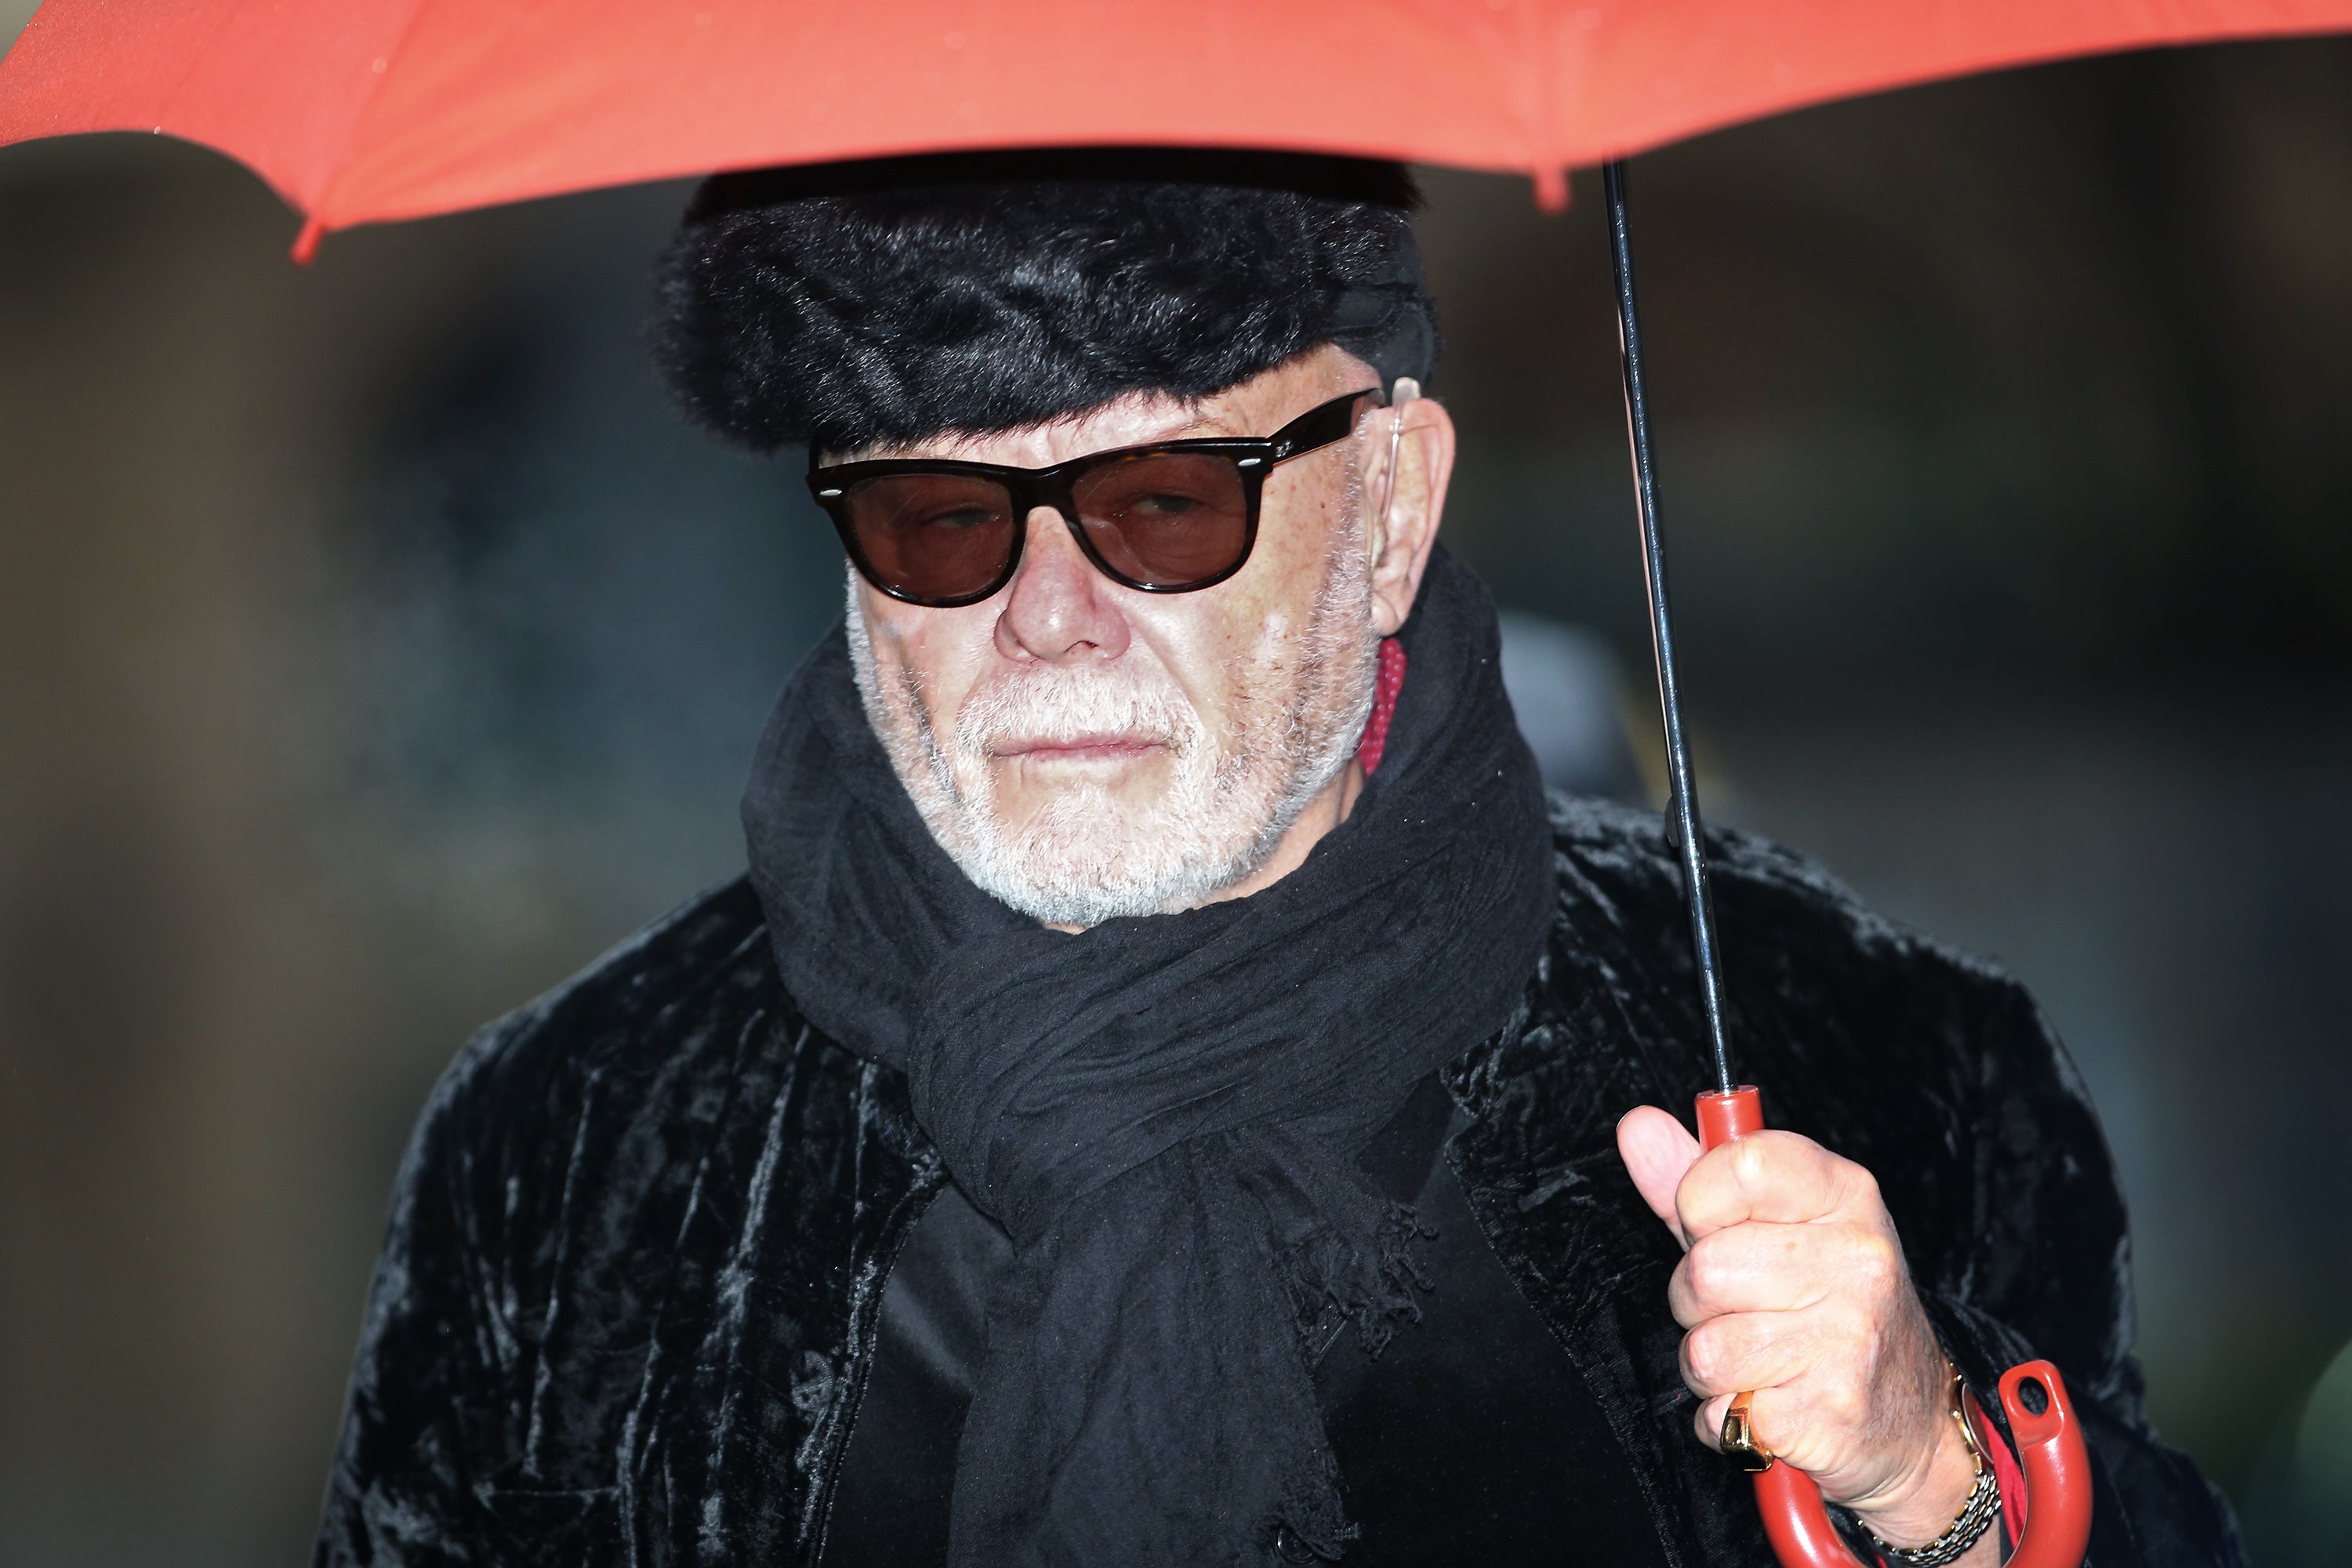 Gary Glitter, real name Paul Gadd, arrives at Southwark Crown Court on 5 February 2015